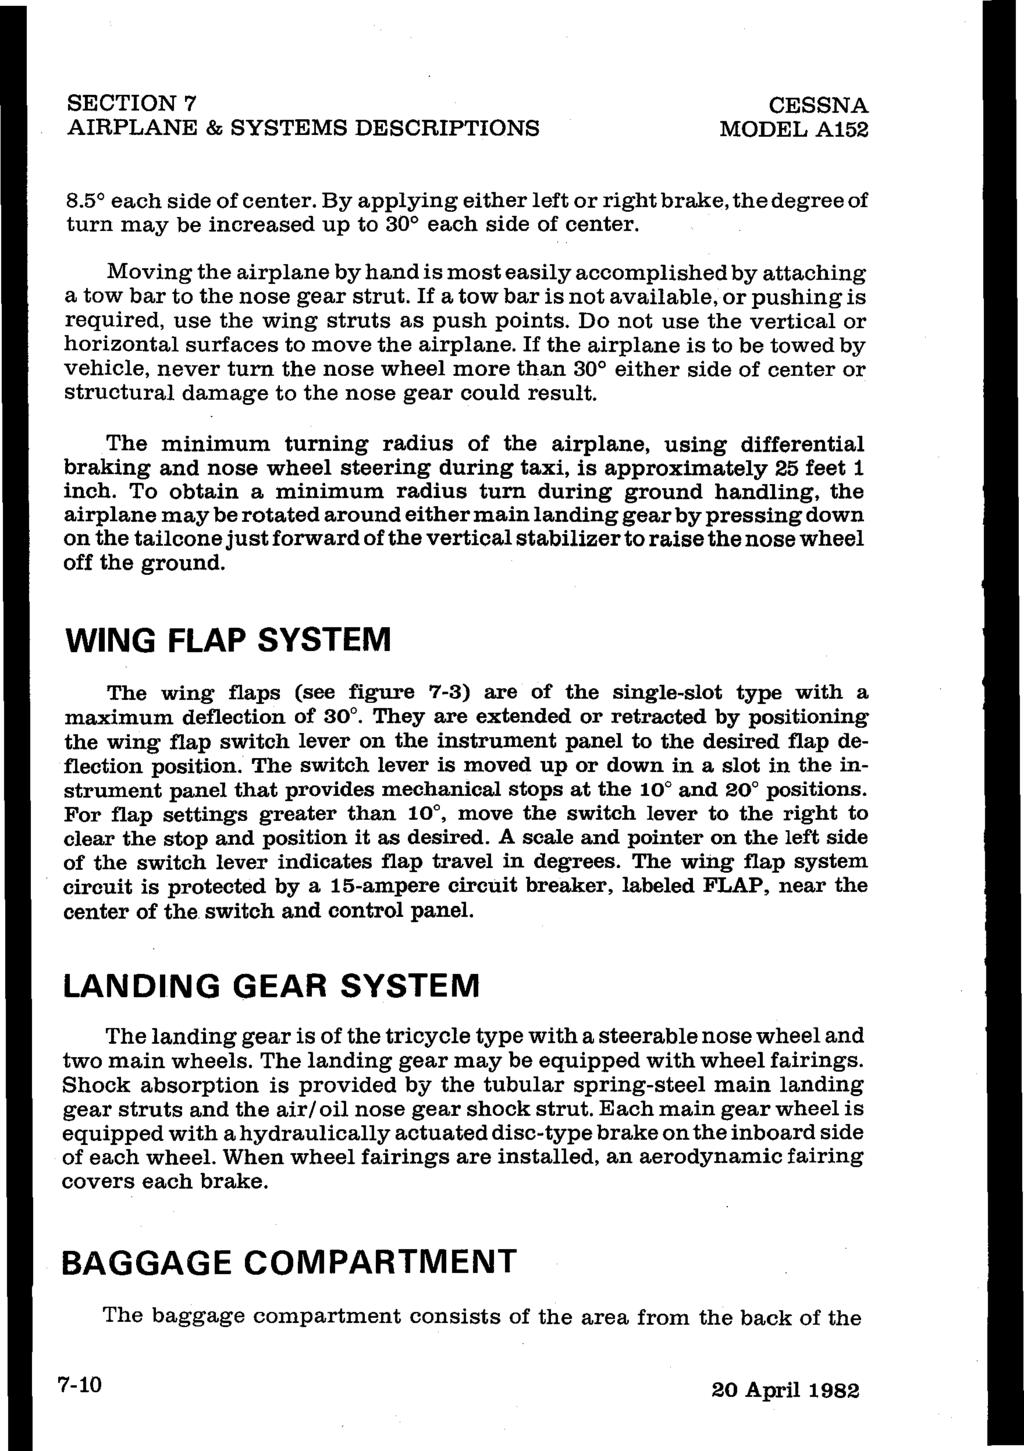 SECTION 7 AIRPLANE & SYSTEMS DESCRIPTIONS CESSNA MODELA152 8.5 each side of center. By applying either left or right brake, the degree of turn may be increased up to 30 each side of center.